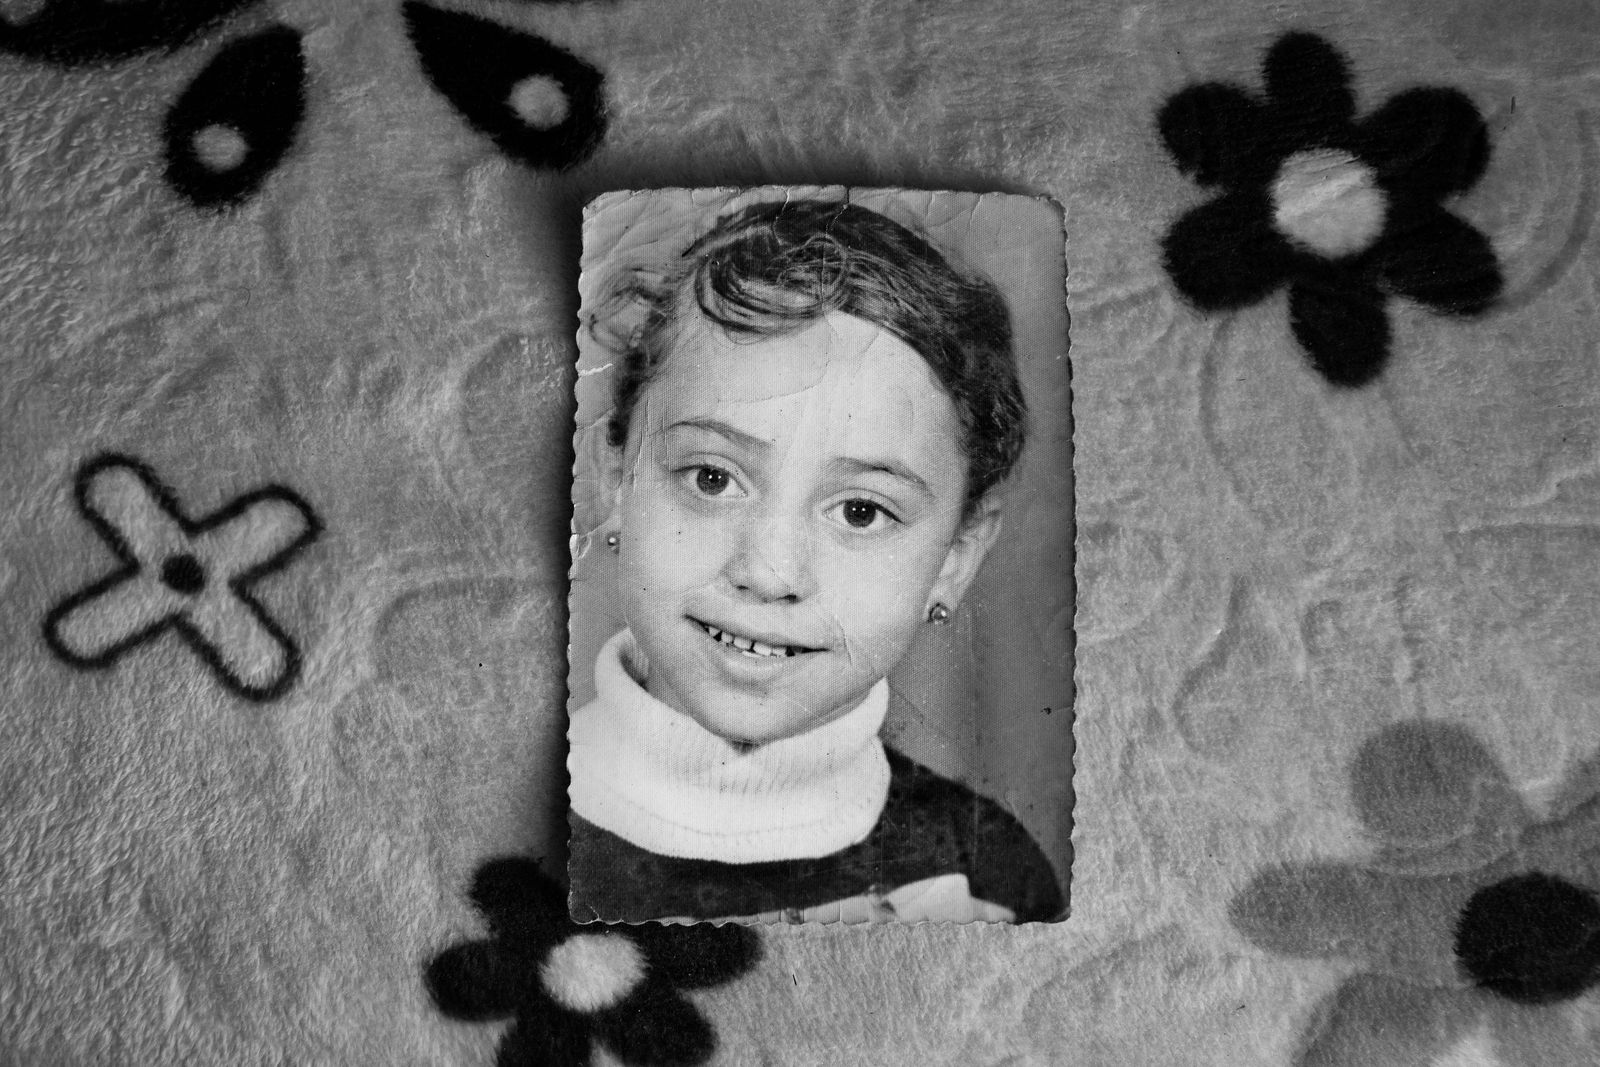 © Lamees Saleh Sharaf Eldin - A picture of Rehab (Fatma in the birth certificate), six years old.